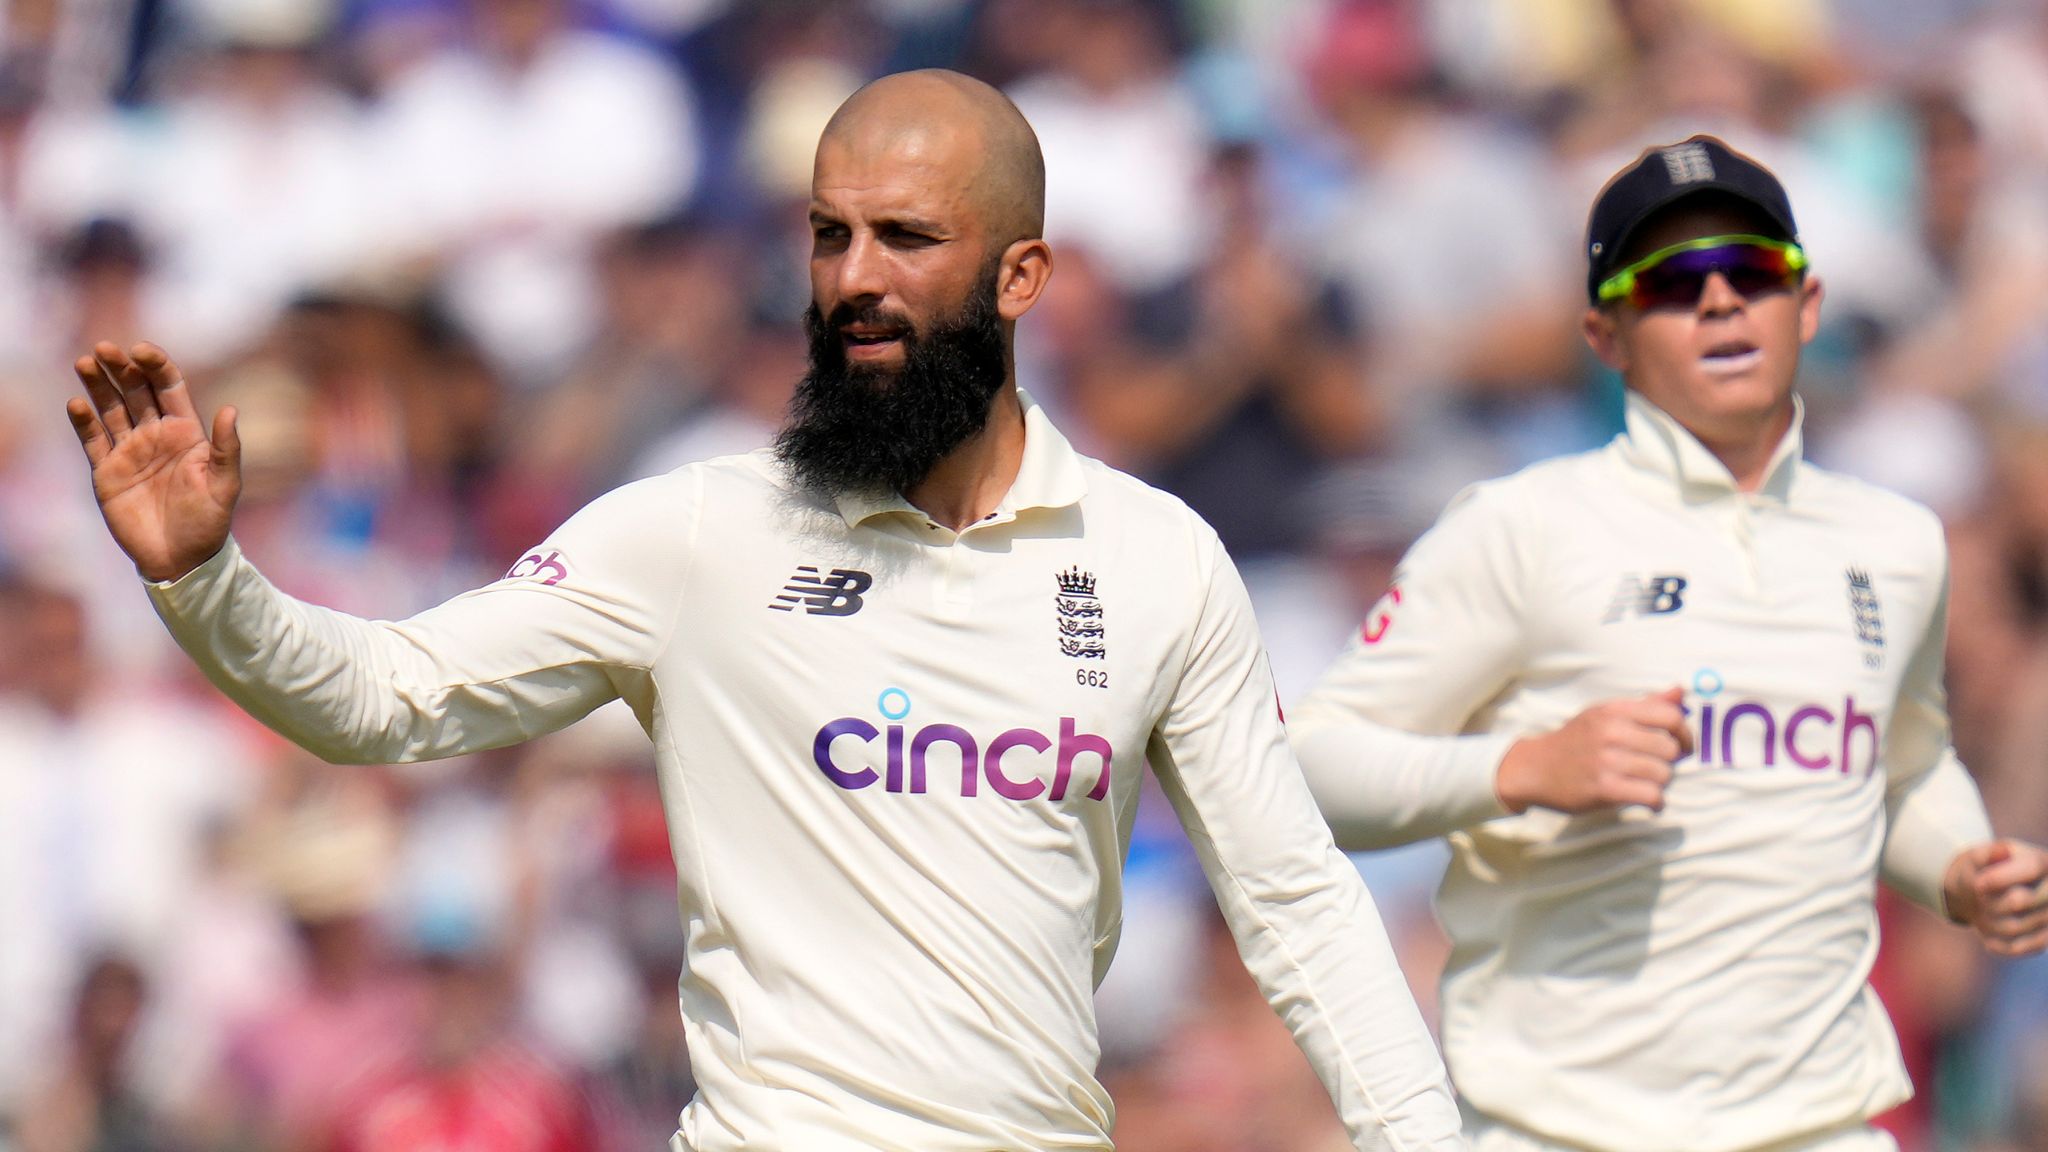 England's Moeen Ali retires from test cricket after 7 years - The San Diego  Union-Tribune